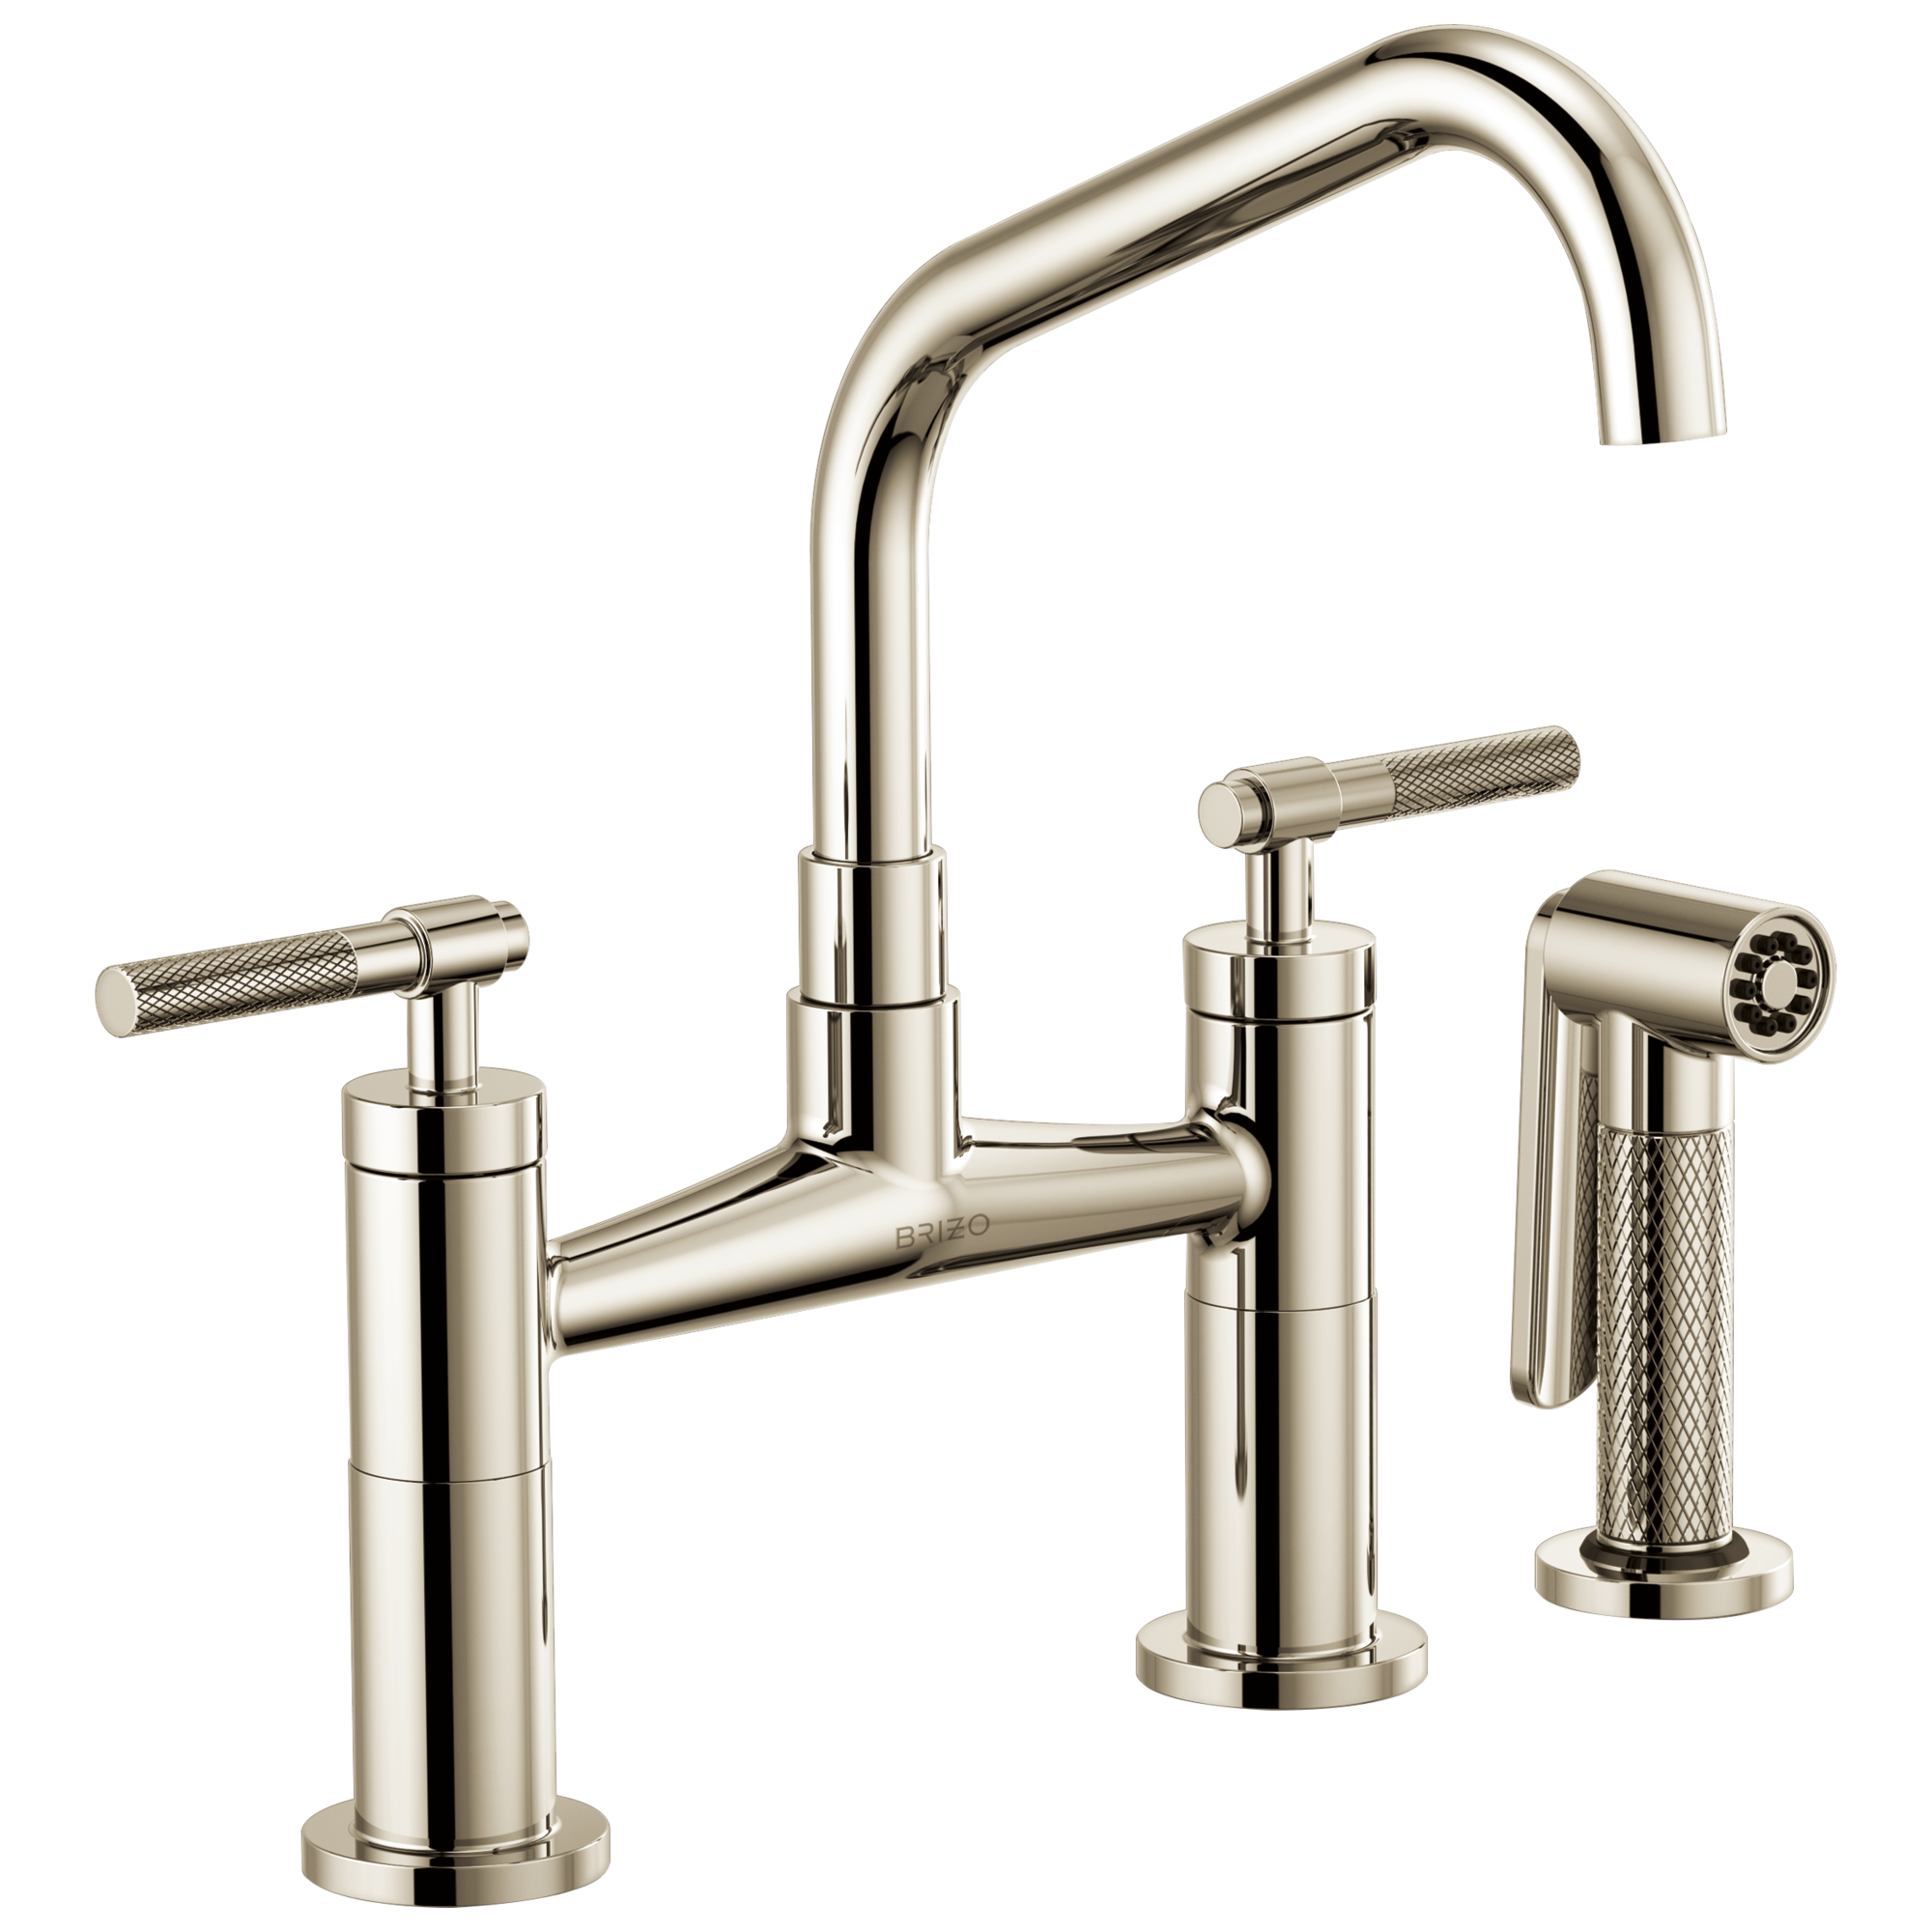 Brizo Litze: Bridge Faucet with Angled Spout and Knurled Handle